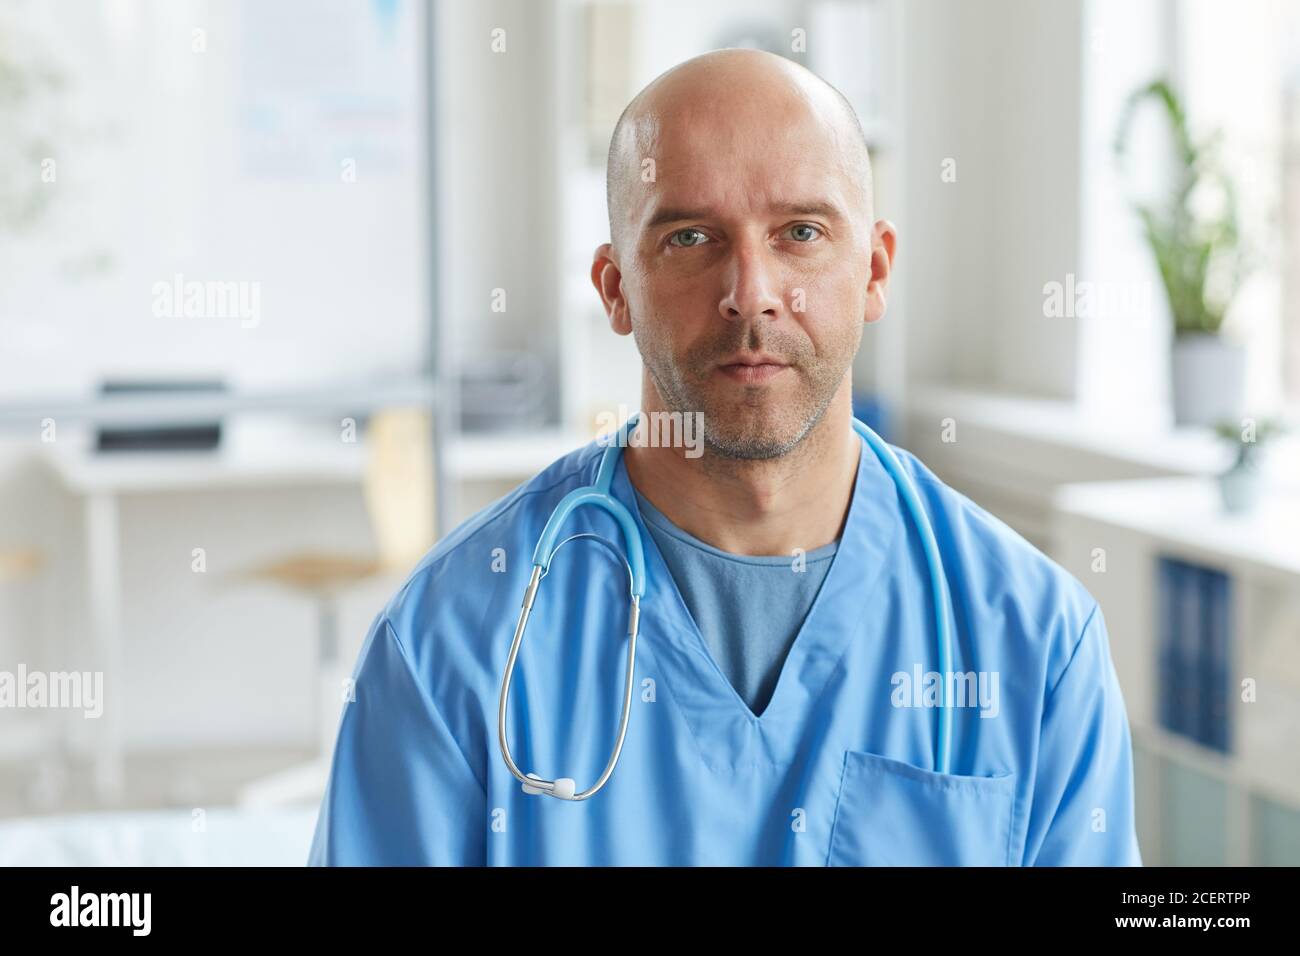 Medium close-up portrait shot of mature doctor wearing blue uniform looking at camera with serious facial expression Stock Photo